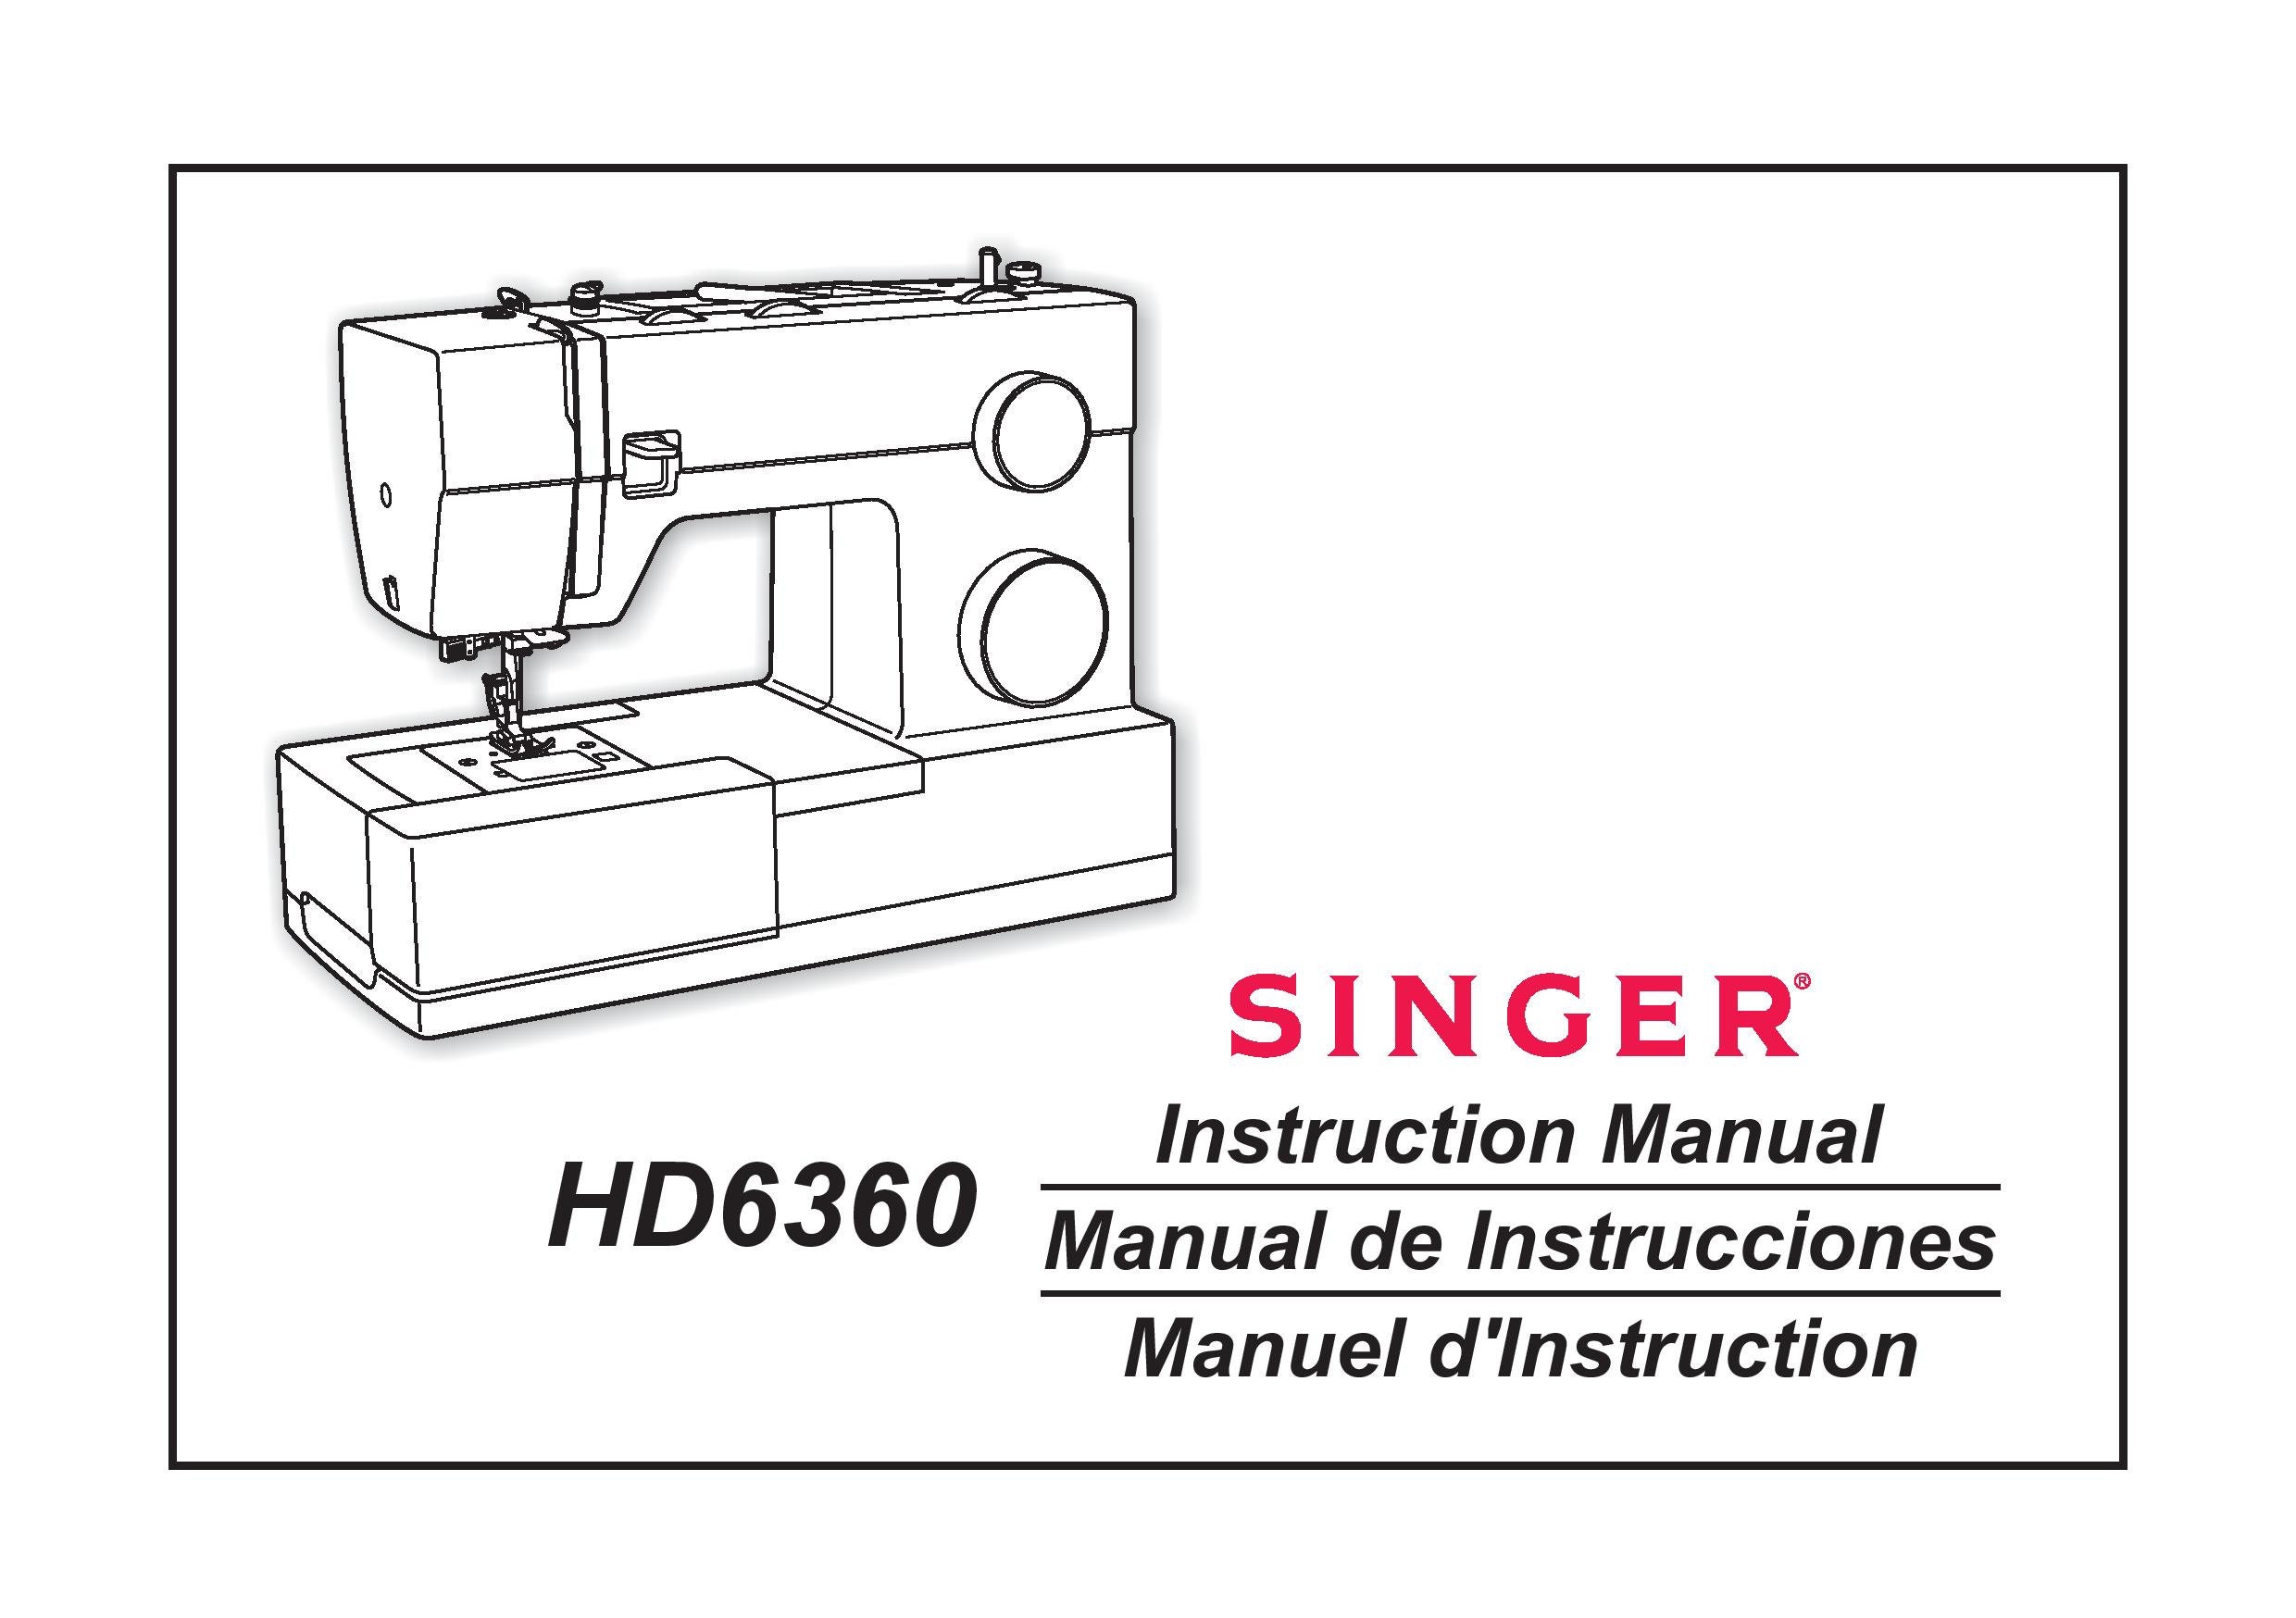 manual for a swinger sewing macheine